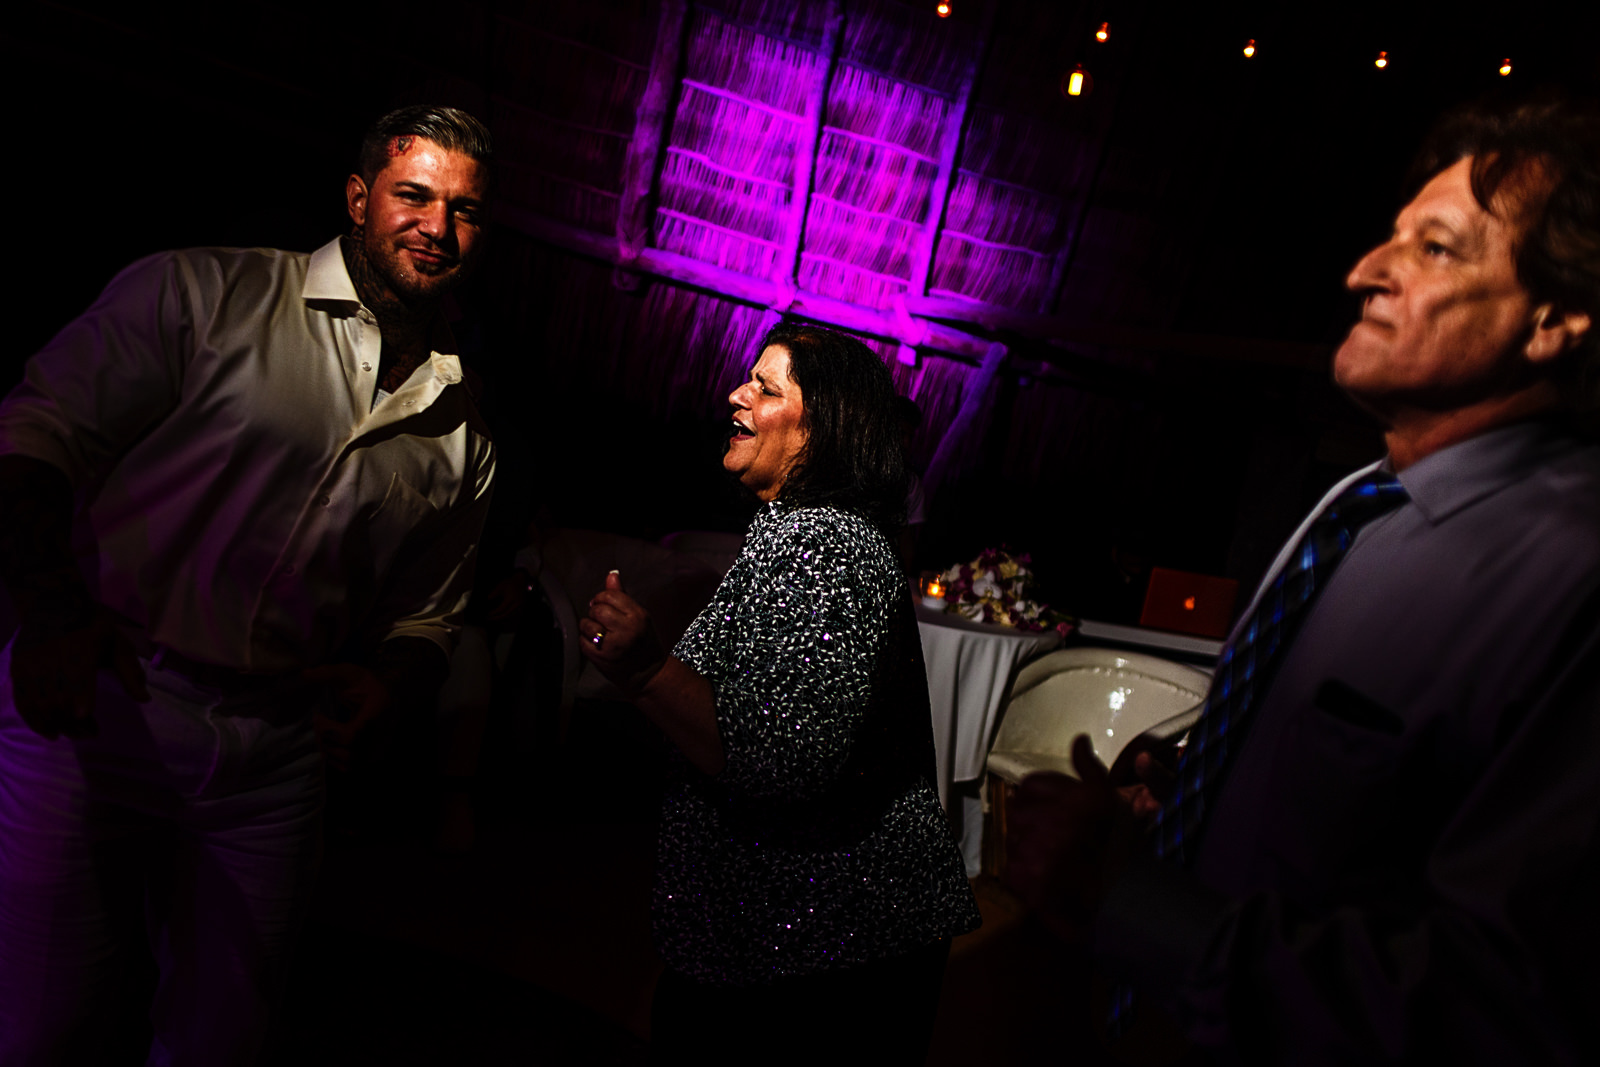 Groom dance with mom and dad at the reception of his destination wedding in Mexico